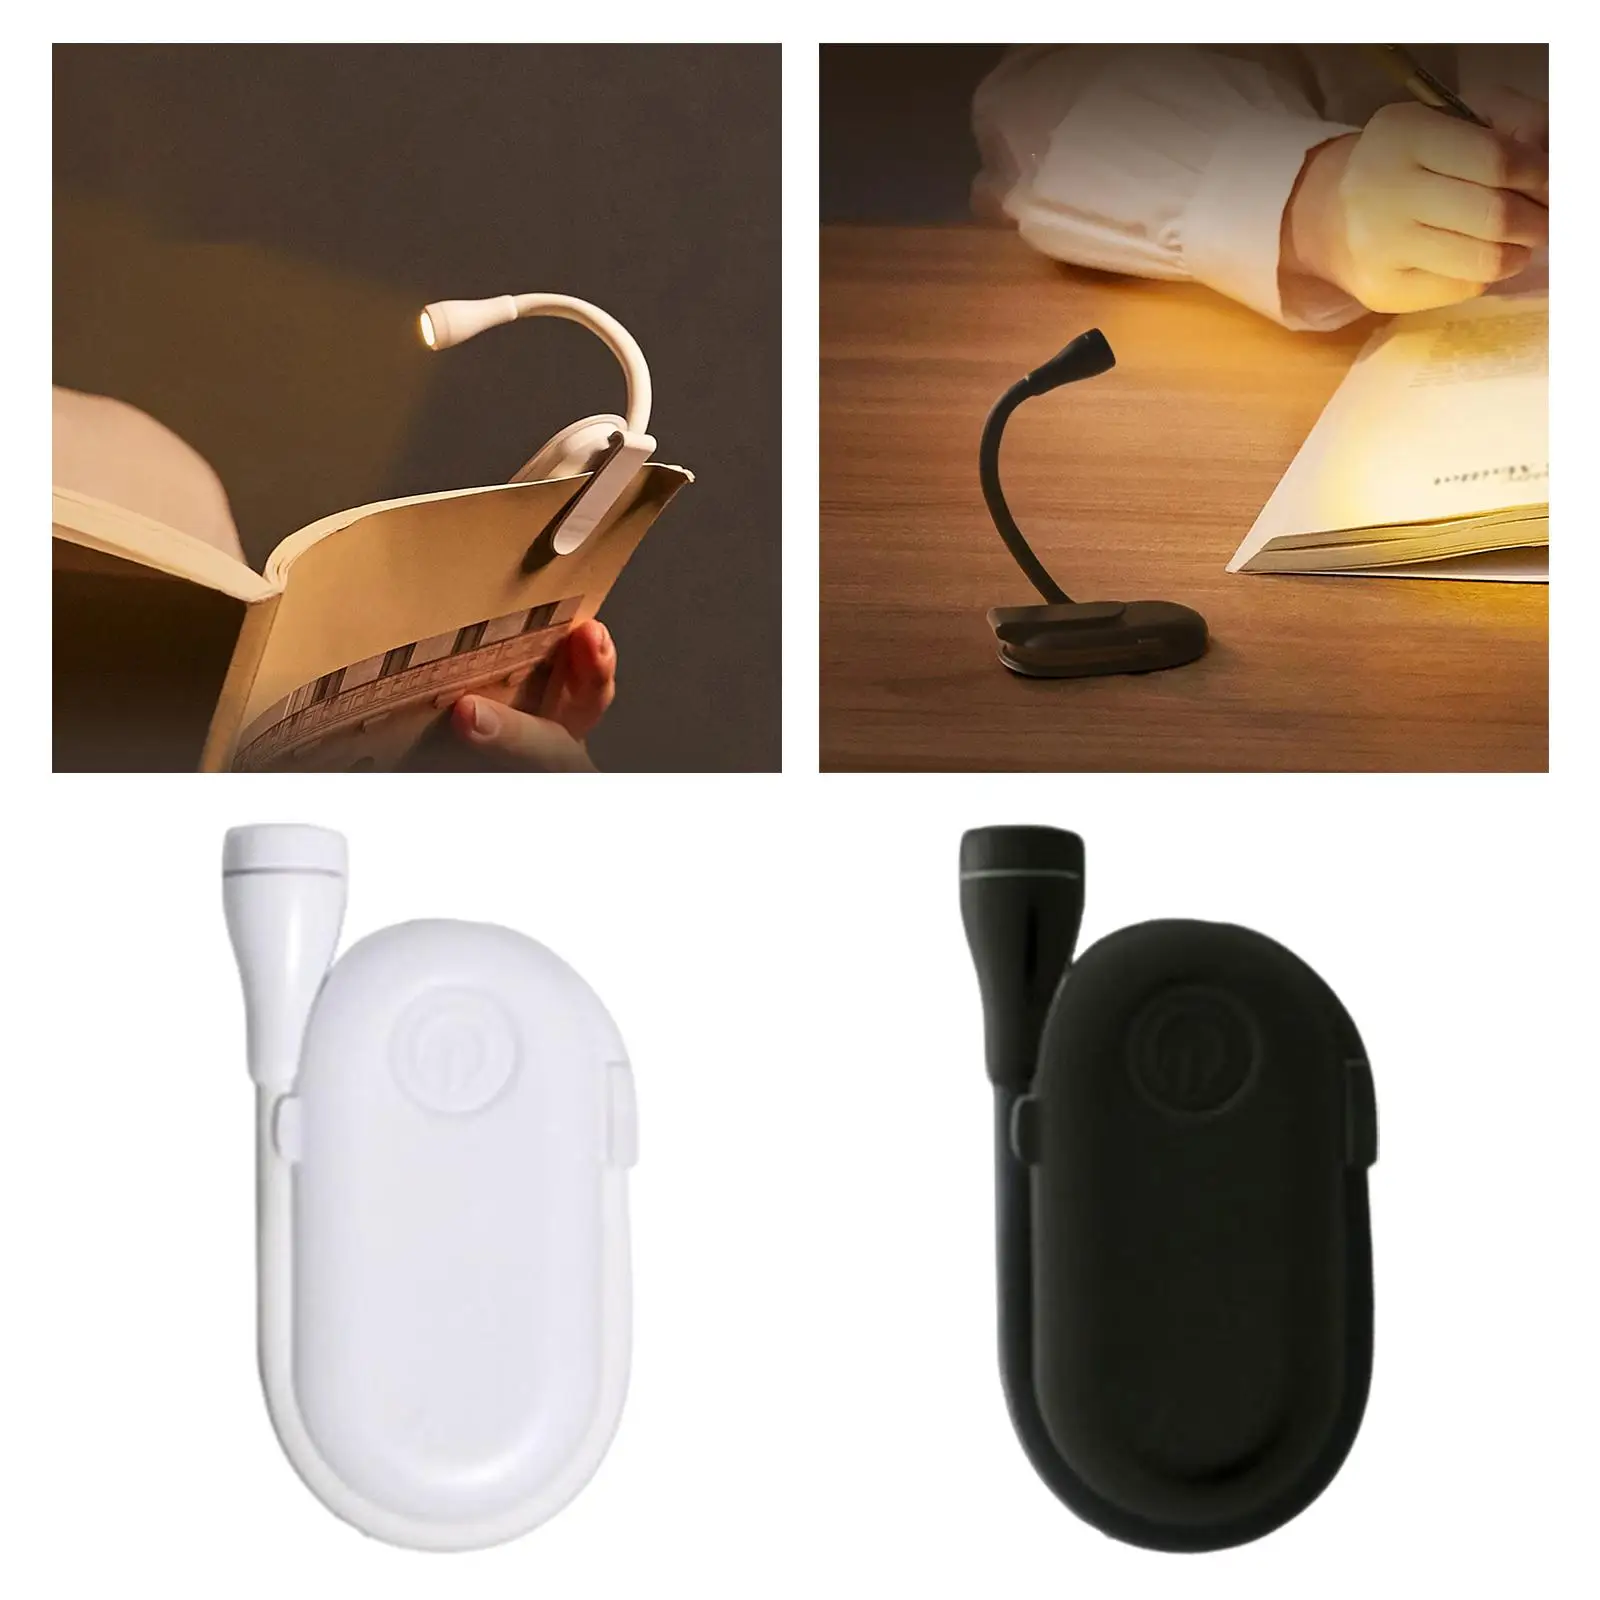 Eye Protection LED Clip On Reading Light Rechargeable Table Lamp Dimmable Night Desk Lamp for Room Working Headboard Computers